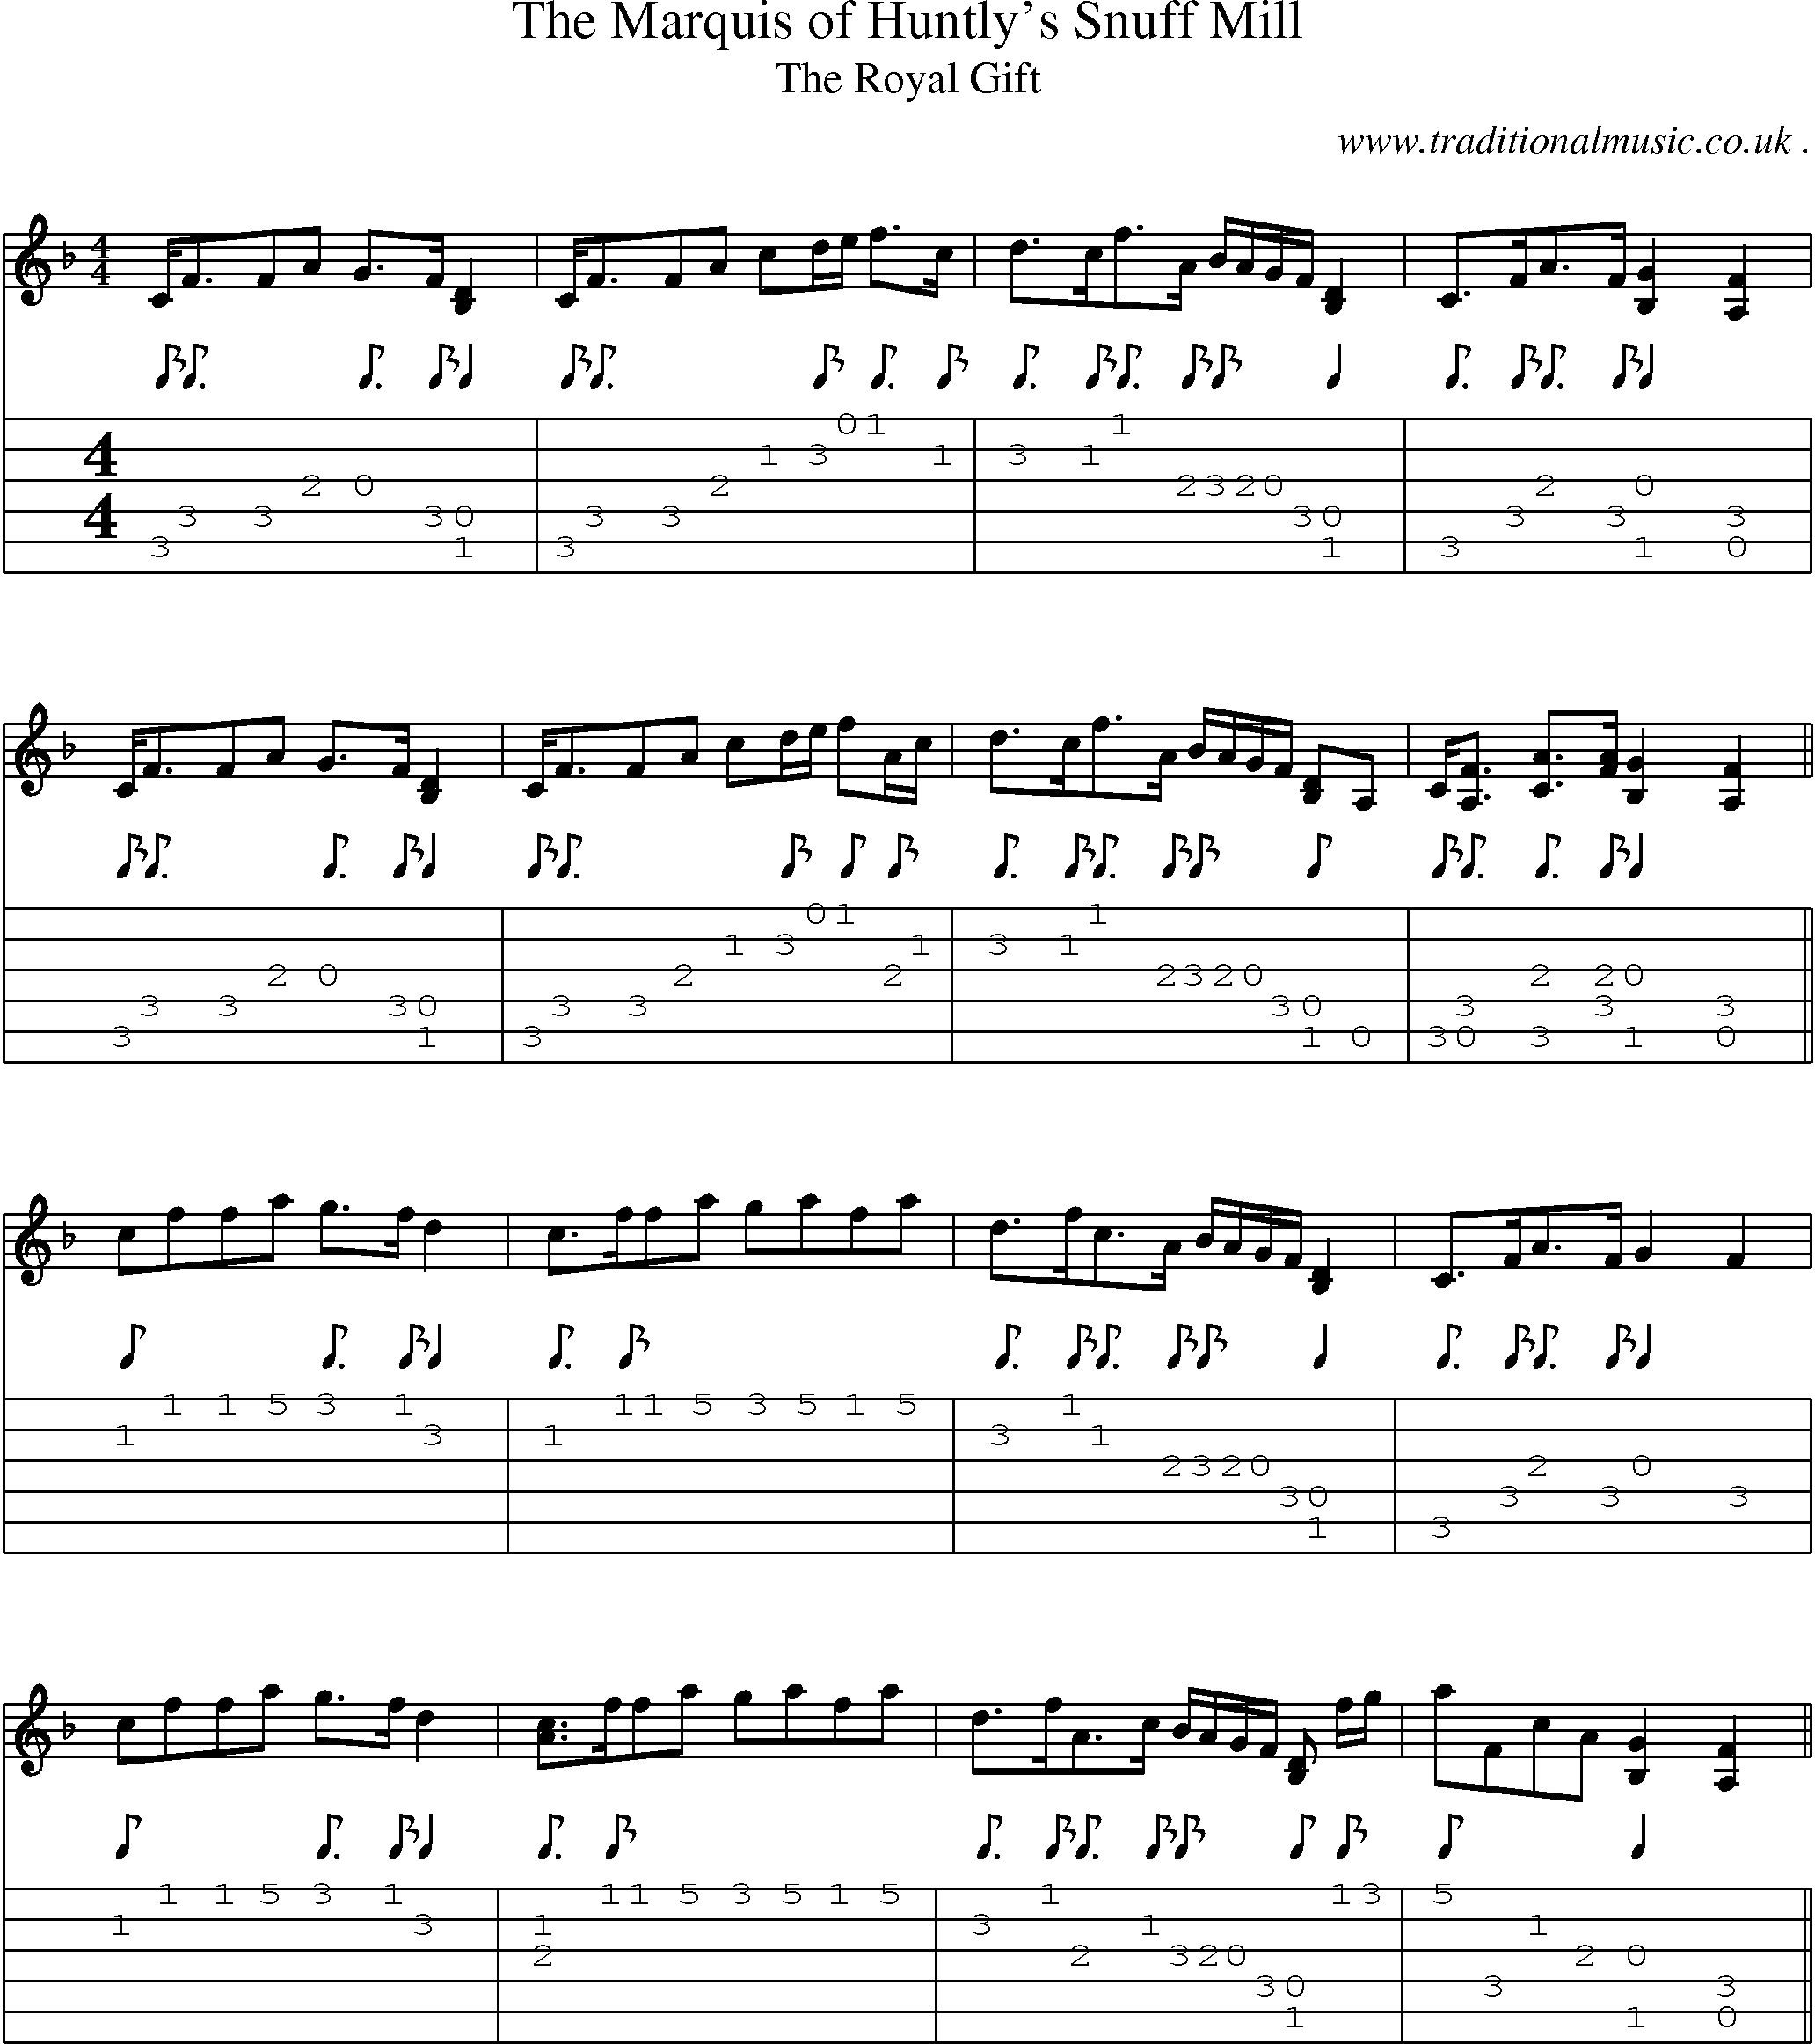 Sheet-Music and Guitar Tabs for The Marquis Of Huntlys Snuff Mill